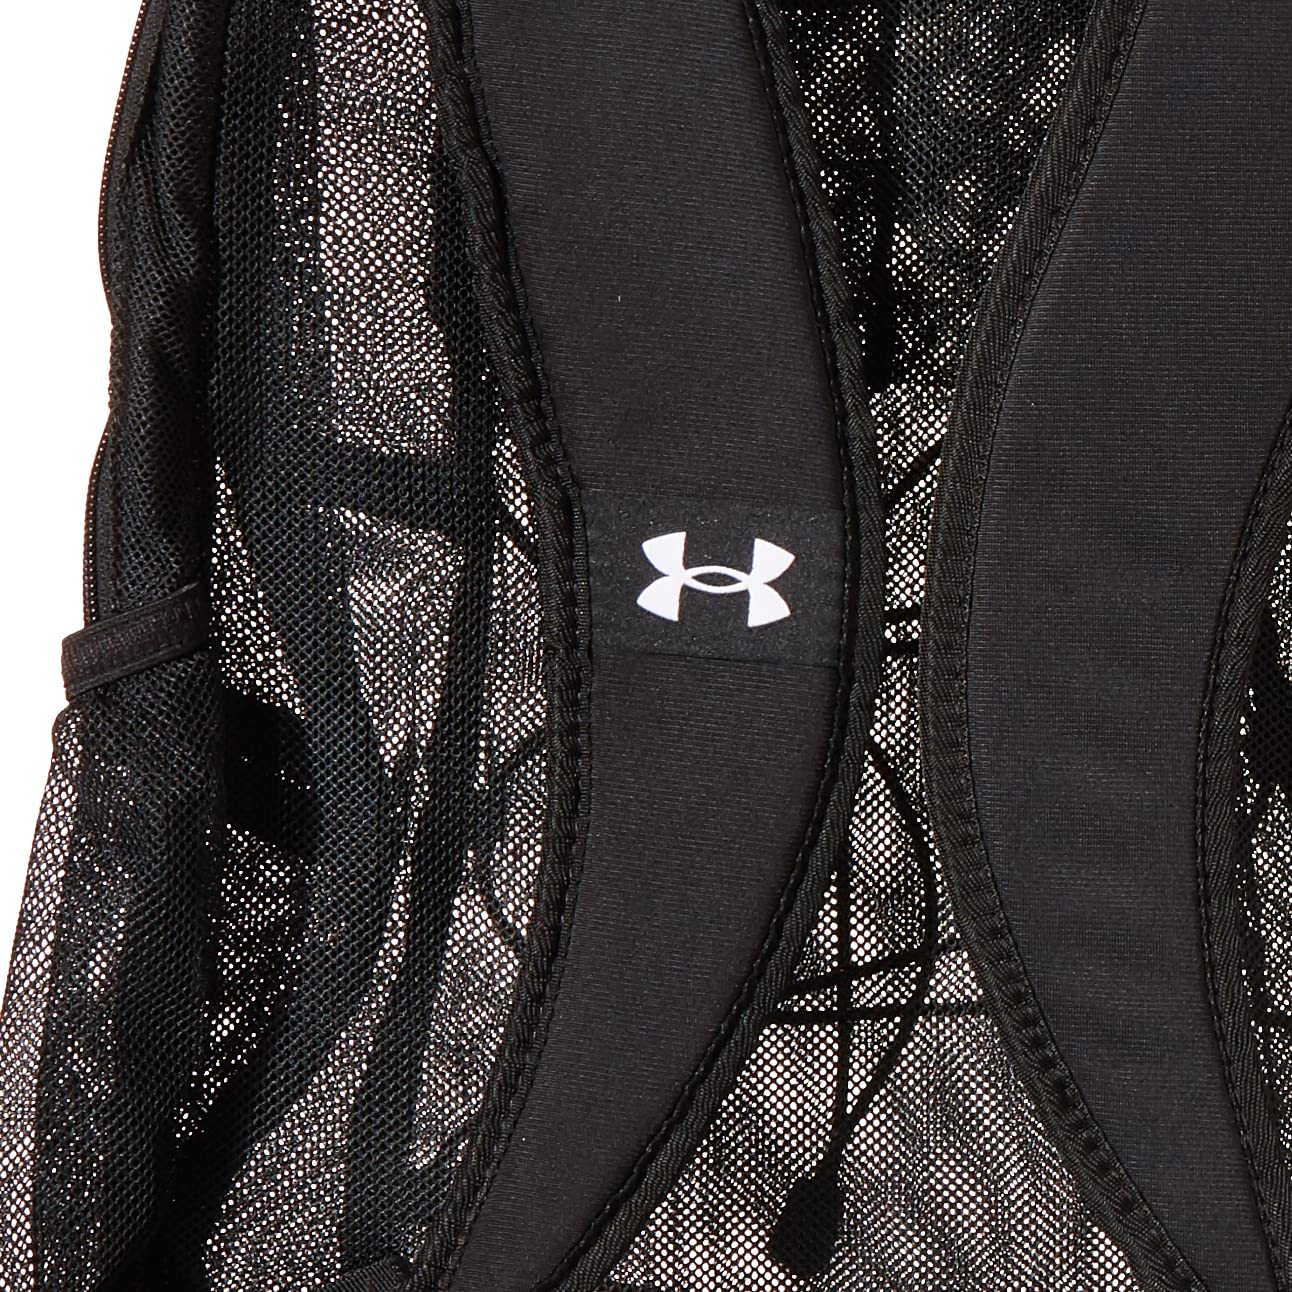 Under Armour Hustle Mesh Backpack, (001) Black / / White, One Size Fits Most